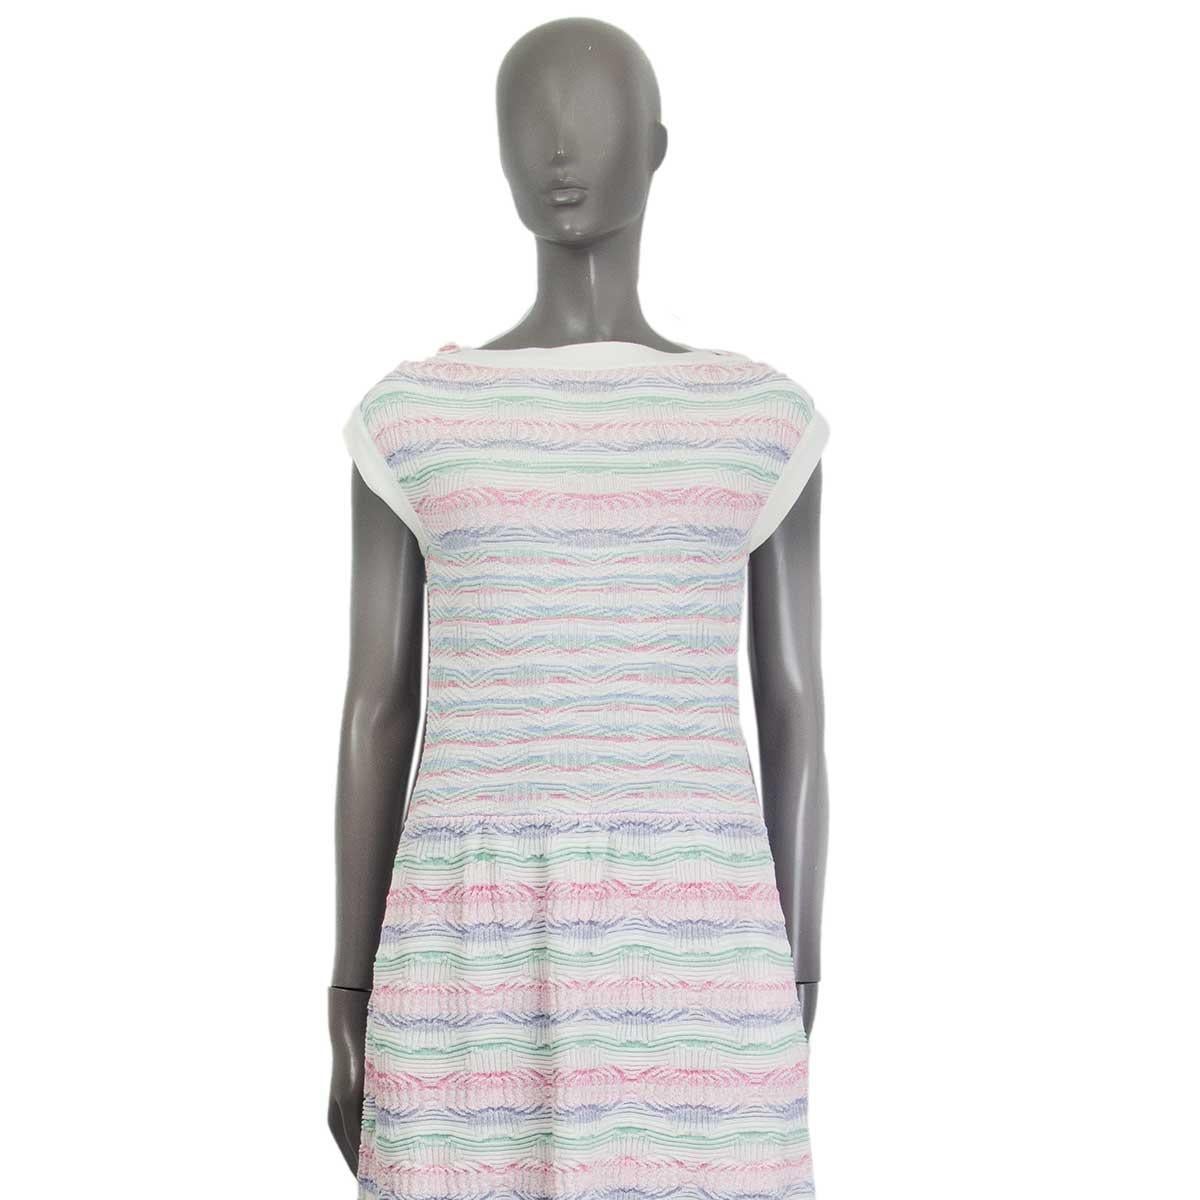 100% authentic Chanel 2016 Paris - Seoul sleeveless boat neck knit dress in off-white, pale pink, pale blue and pale green cotton (93%) and nylon (7%). Decorative buttons on the shoulder and slit pockets on the side. Has been worn and is in